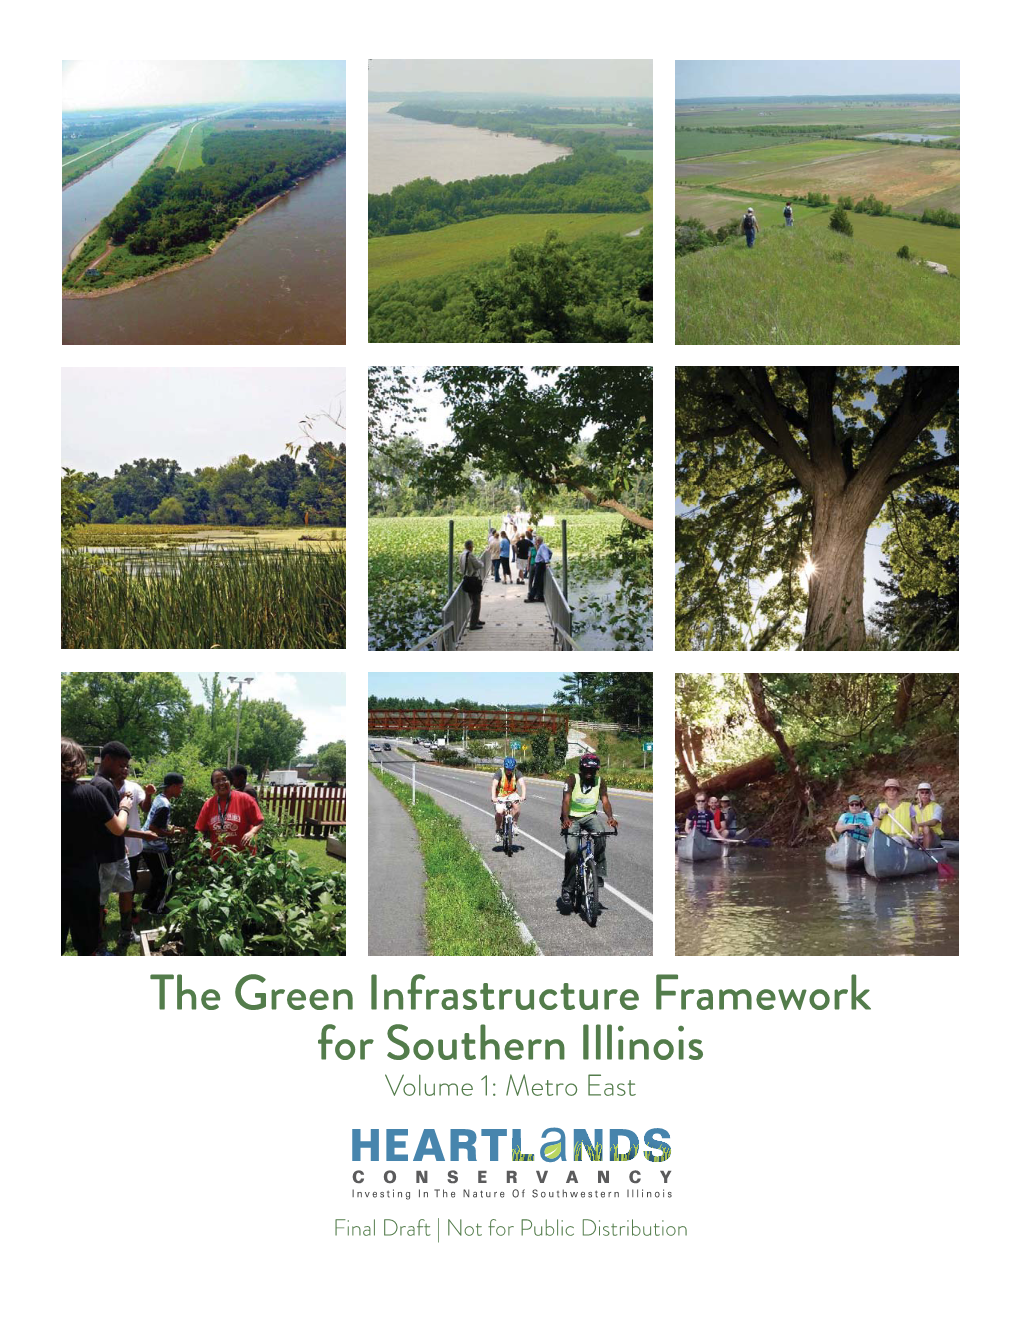 The Green Infrastructure Framework for Southern Illinois Volume 1: Metro East